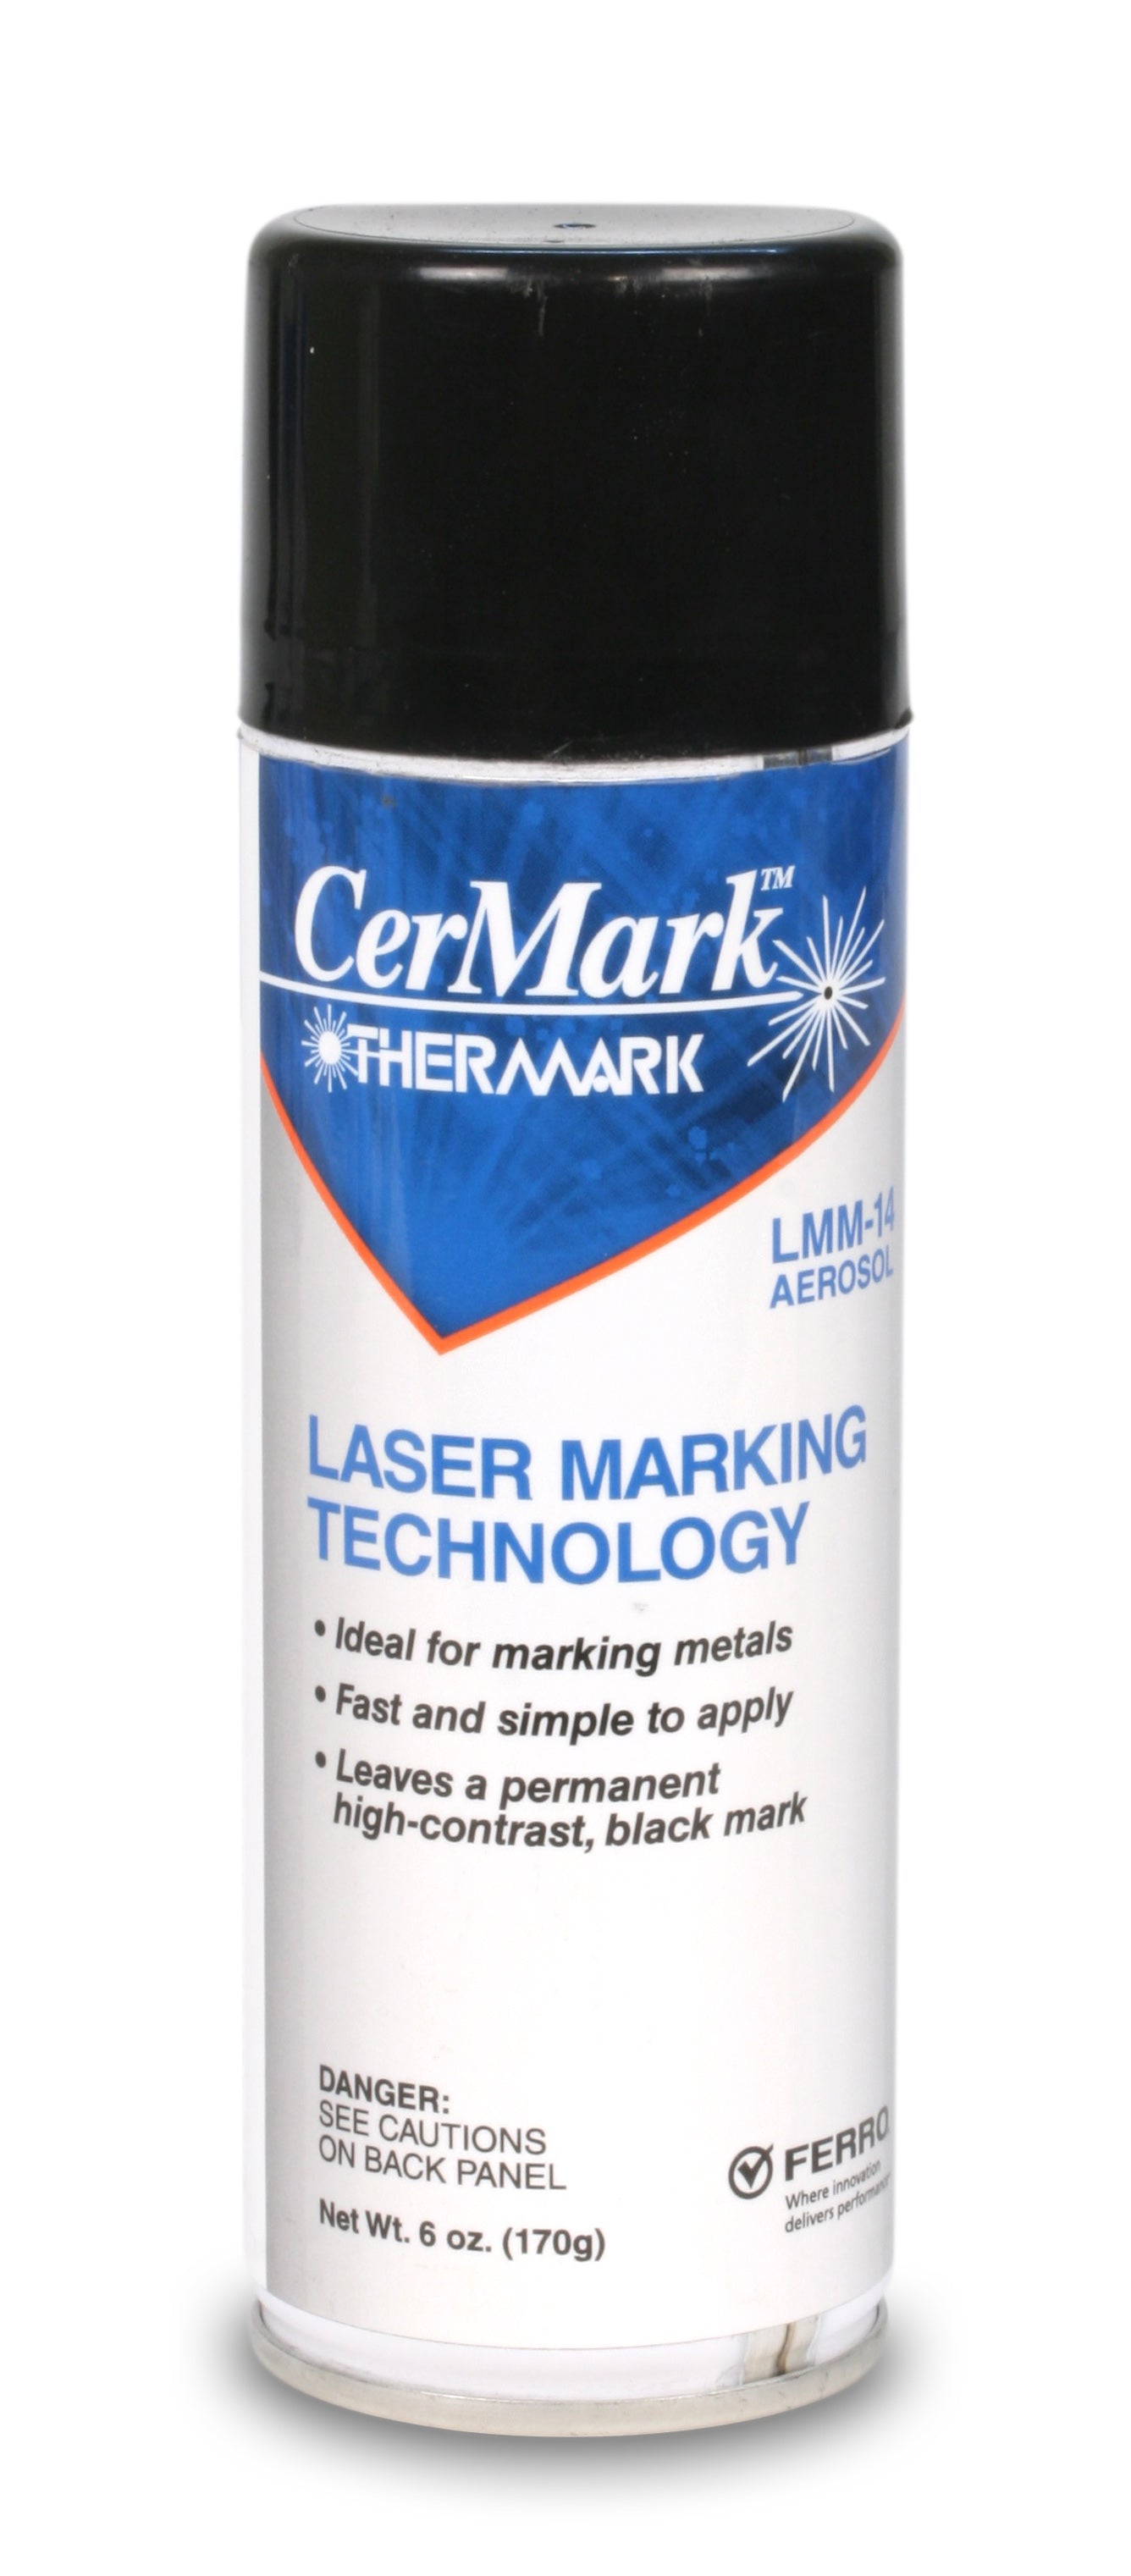 Marking metals - colouring engravings - CerMark - Thermark